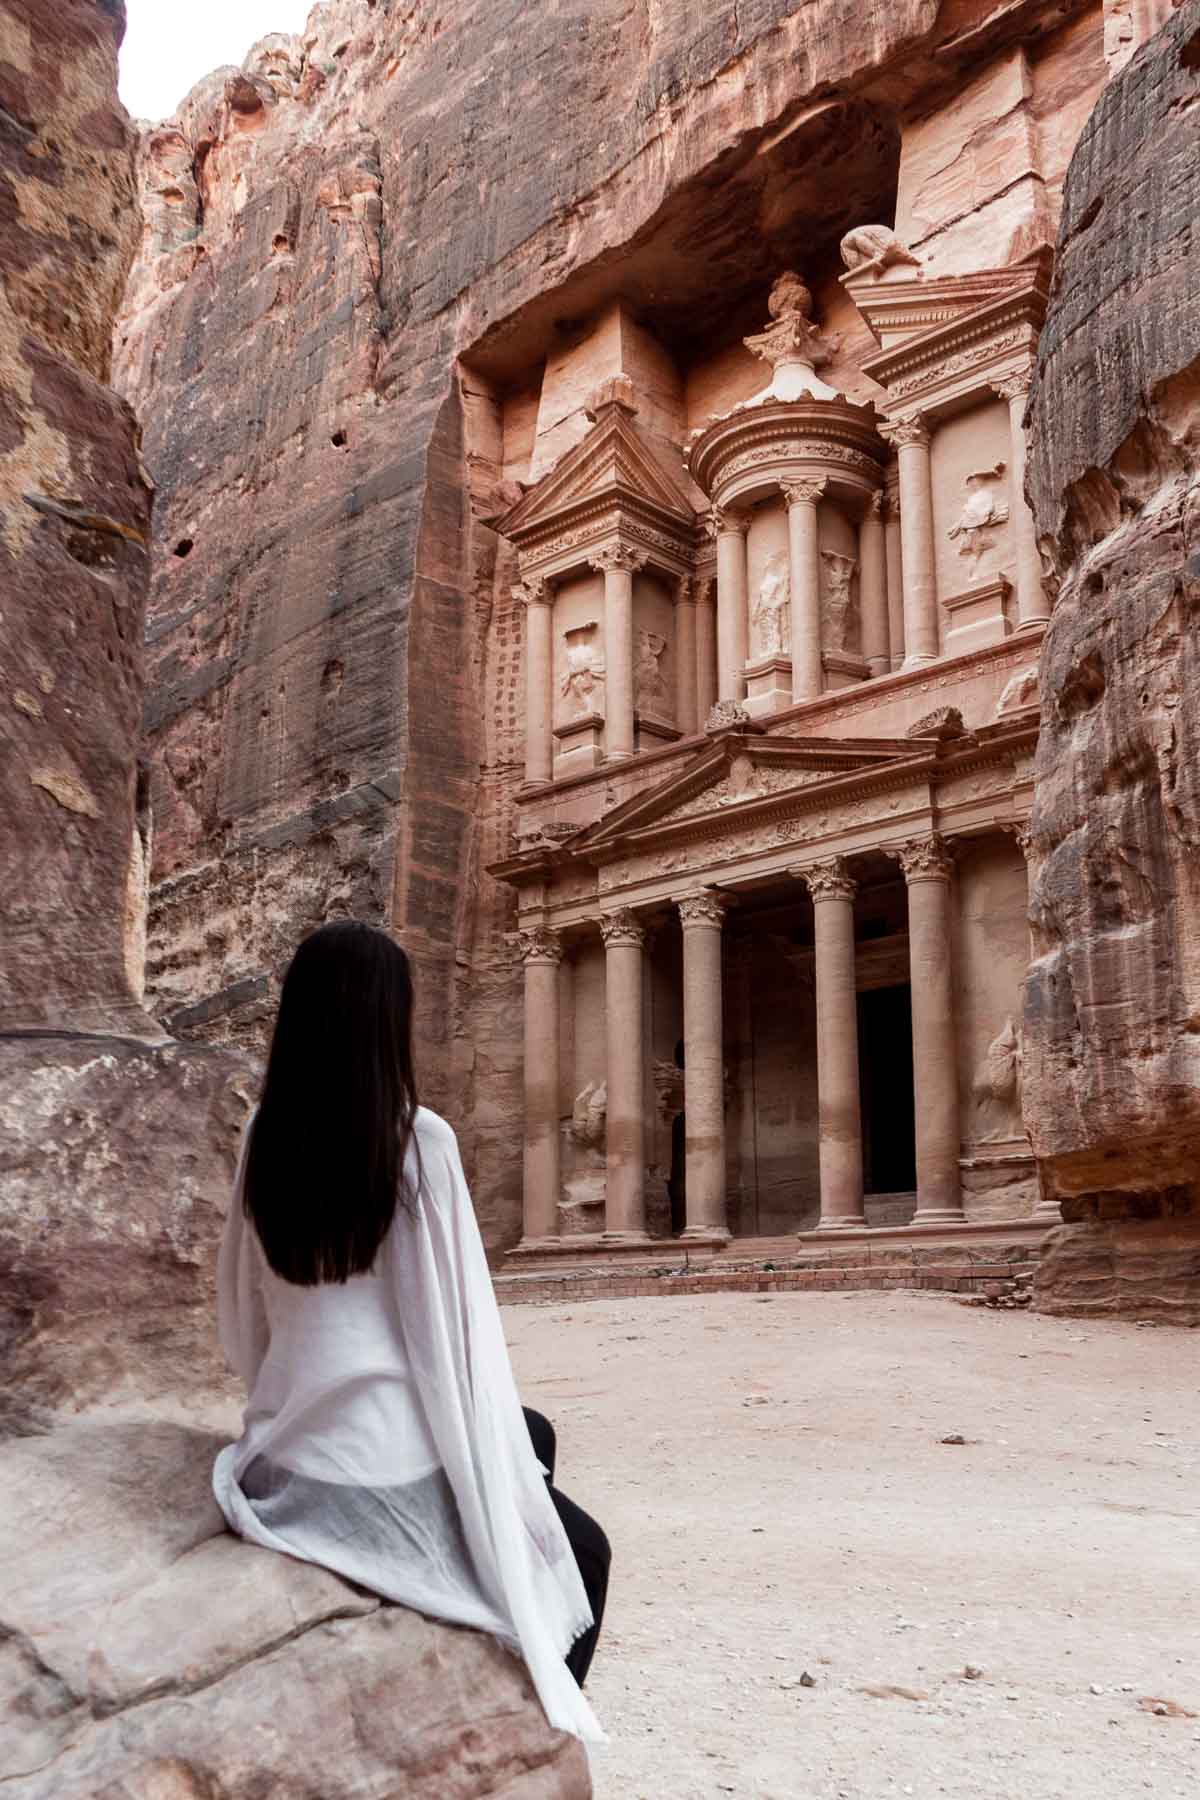 Girl in a white scarf looking at the Treasury in Petra, Jordan